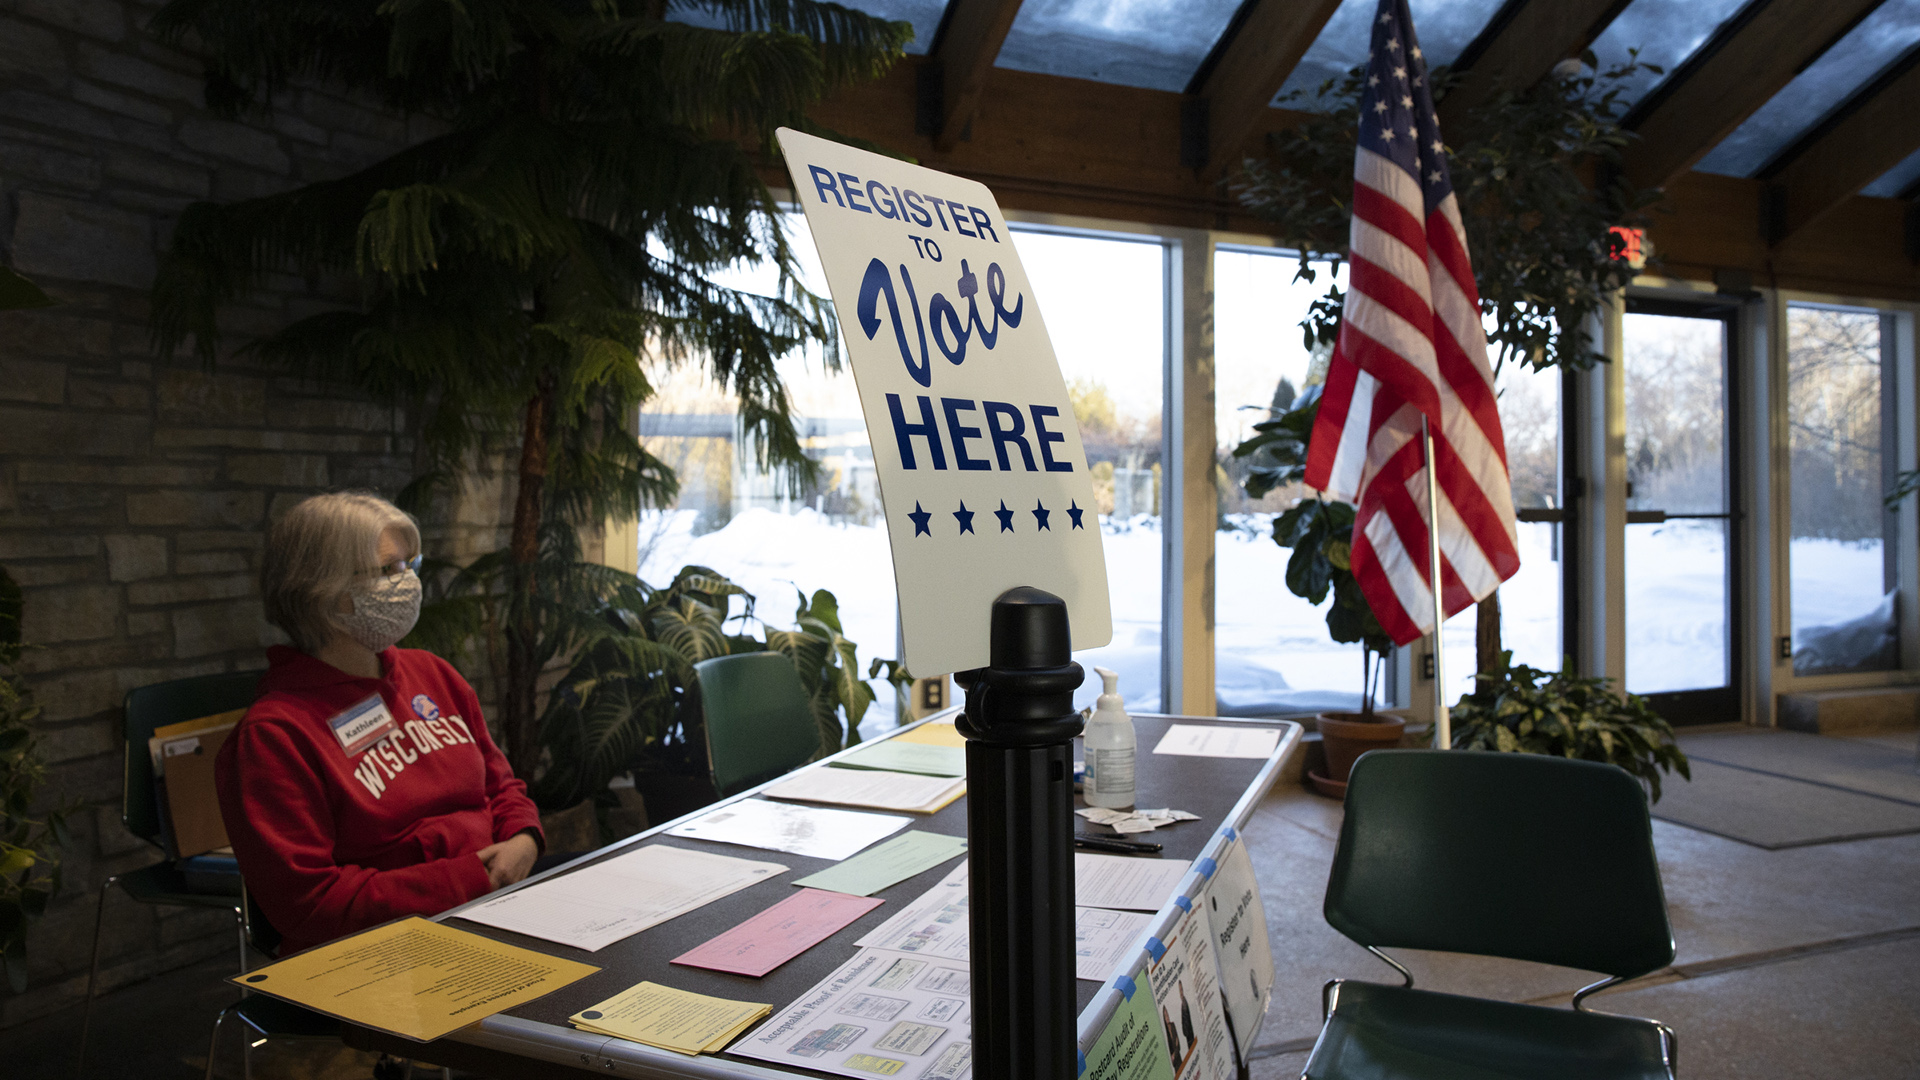 Kathleen Krchnavek sits behind a table covered with different paper forms and instructional materials, with a sign on a stand reading "Register to Vote Here" and a U.S. flag on either side, with a skylight, windows and glass doors in the background showing snowy conditions outside.